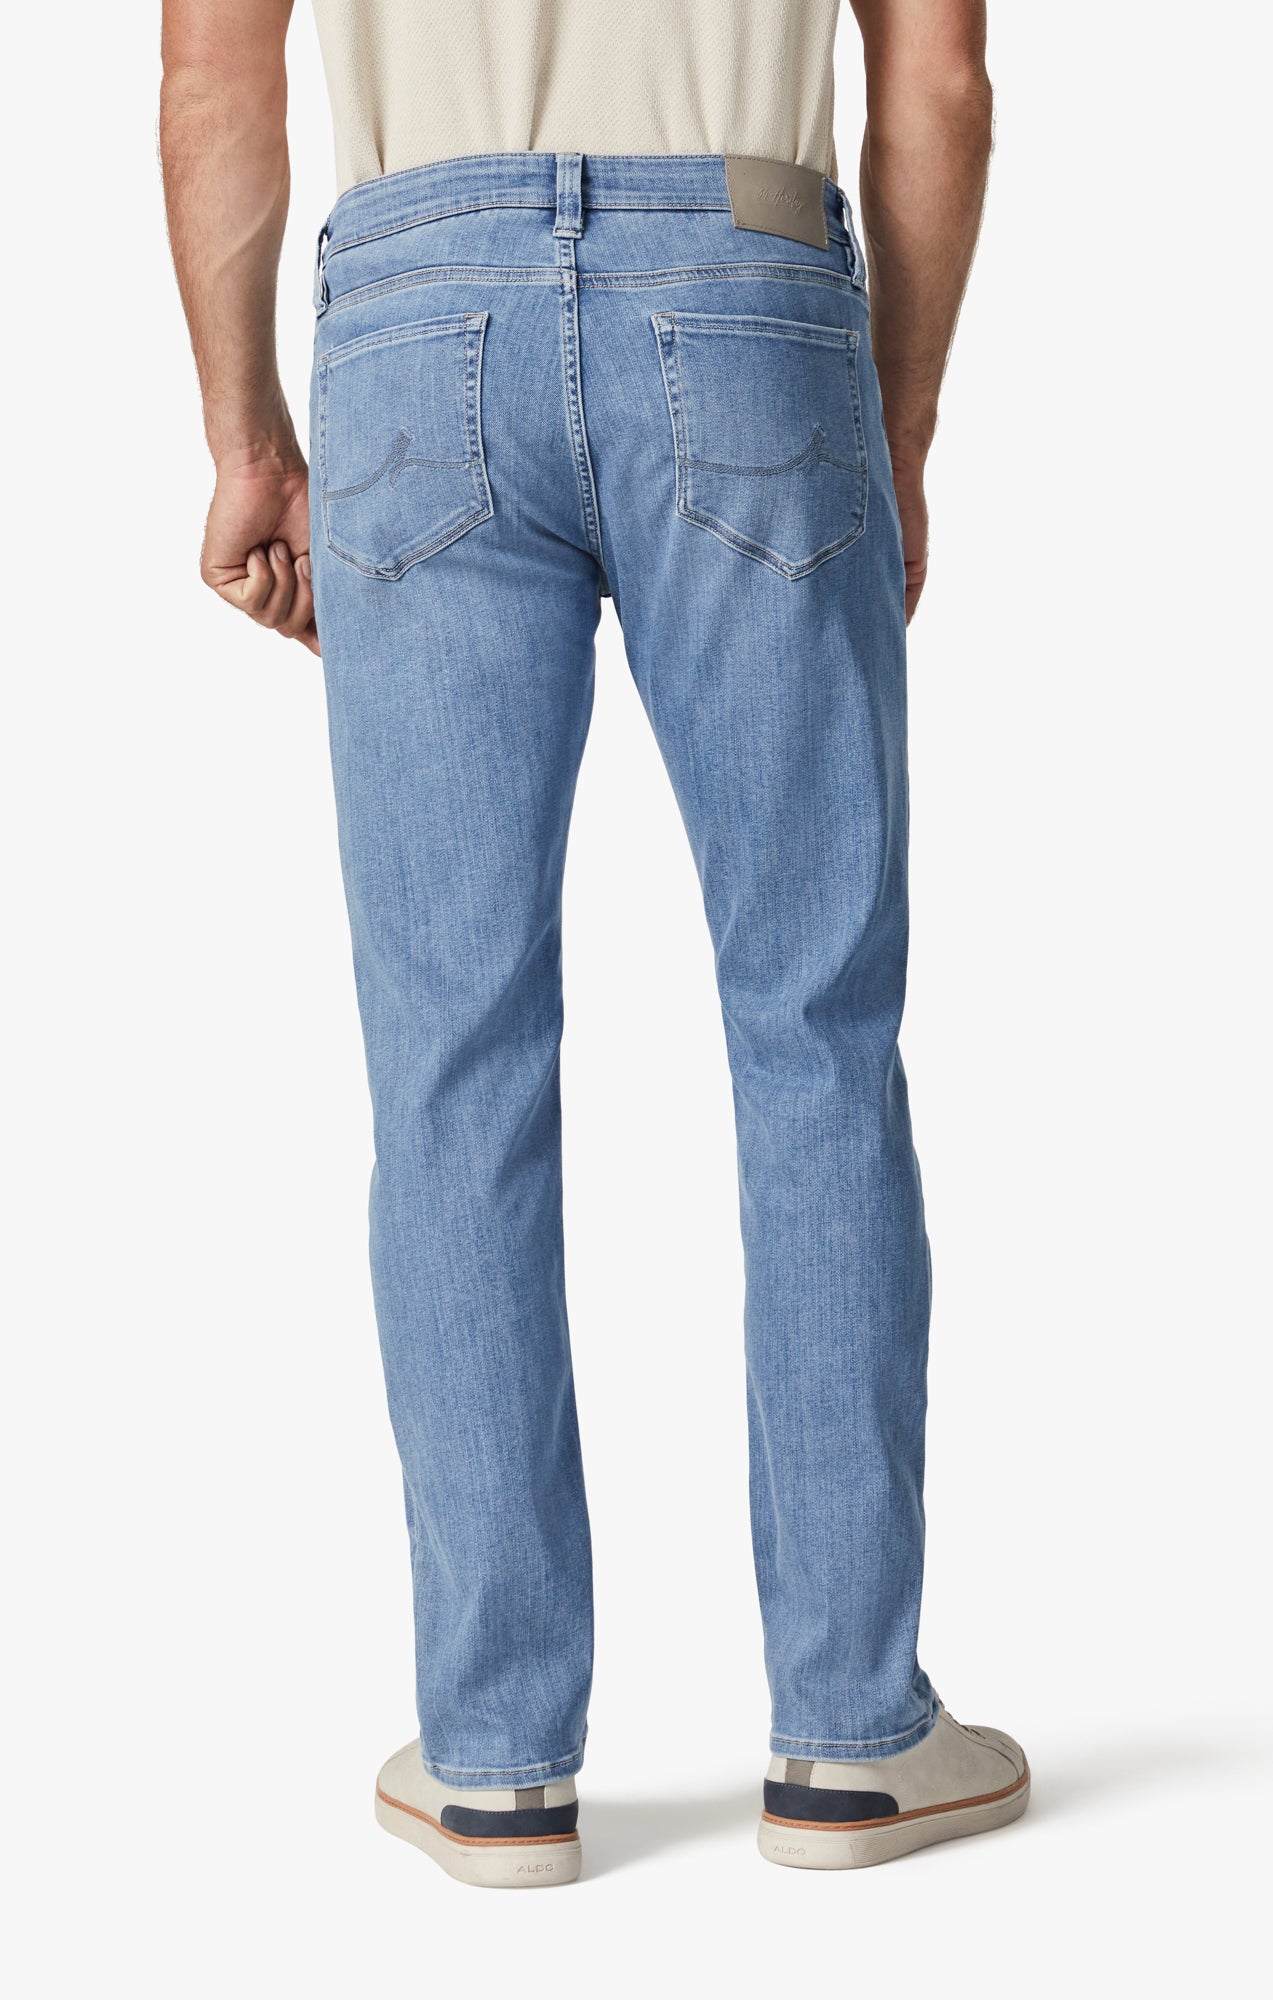 Courage Straight Leg Jeans In Light Brushed Urban Image 4